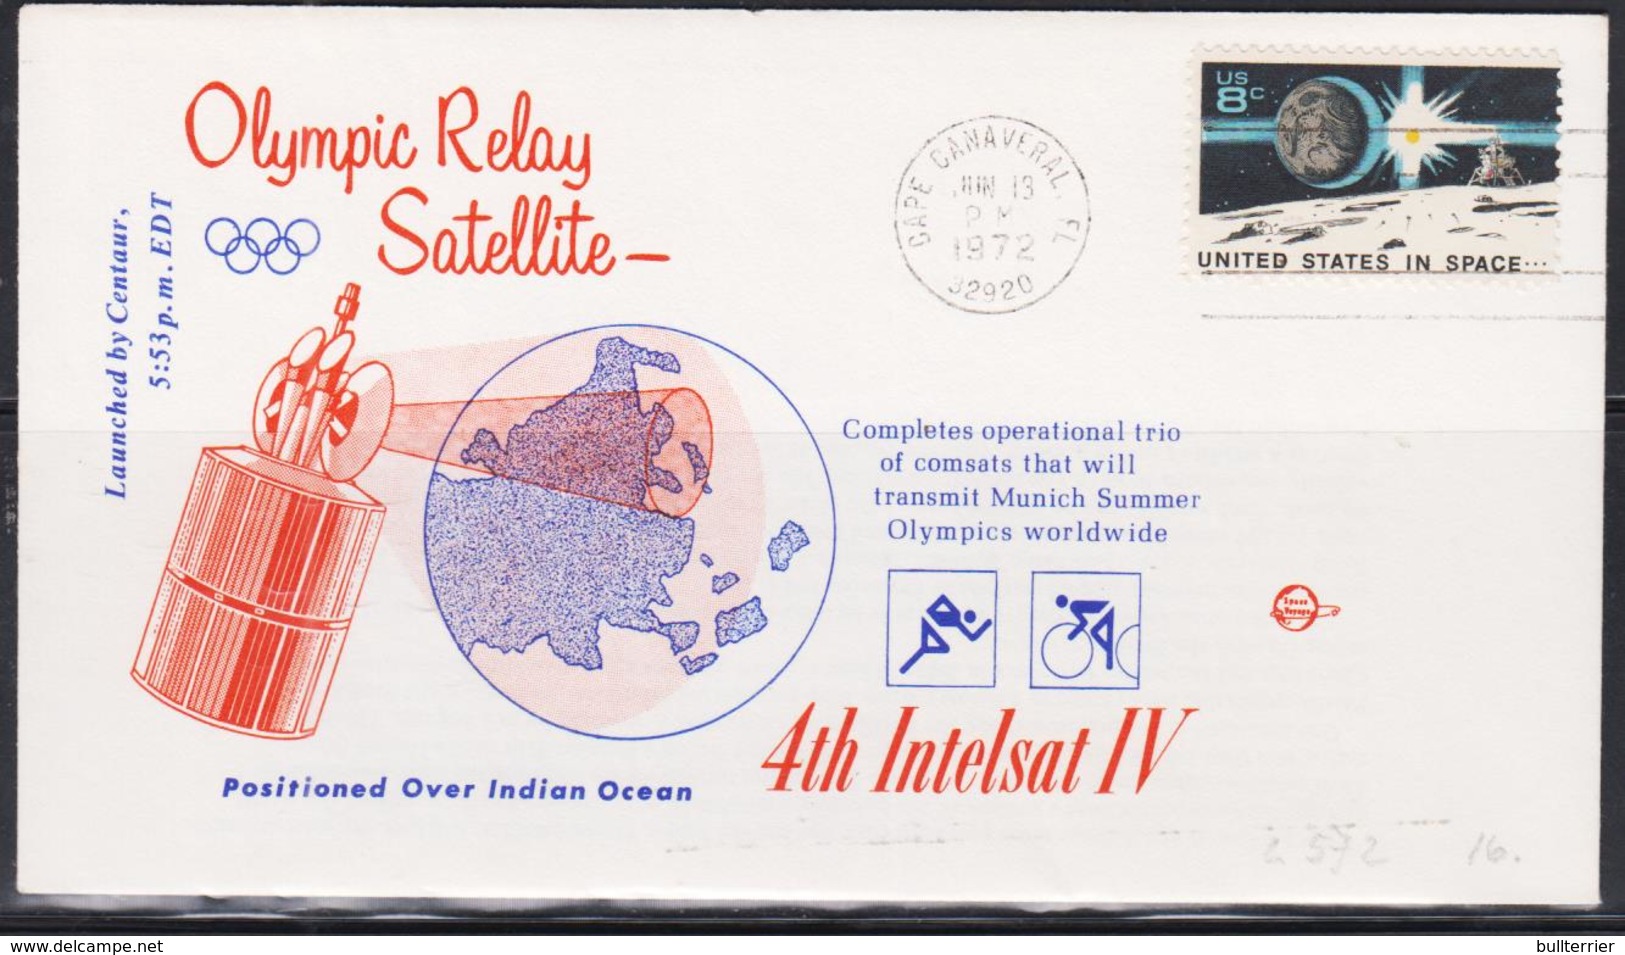 SPACE  - USA-  1972 - OLYMPICS TV  SATELLITTE   ILLUSTRATED  COVER WITH CAPE CANAVERAL  JUN 13  1972  POSTMARK - United States